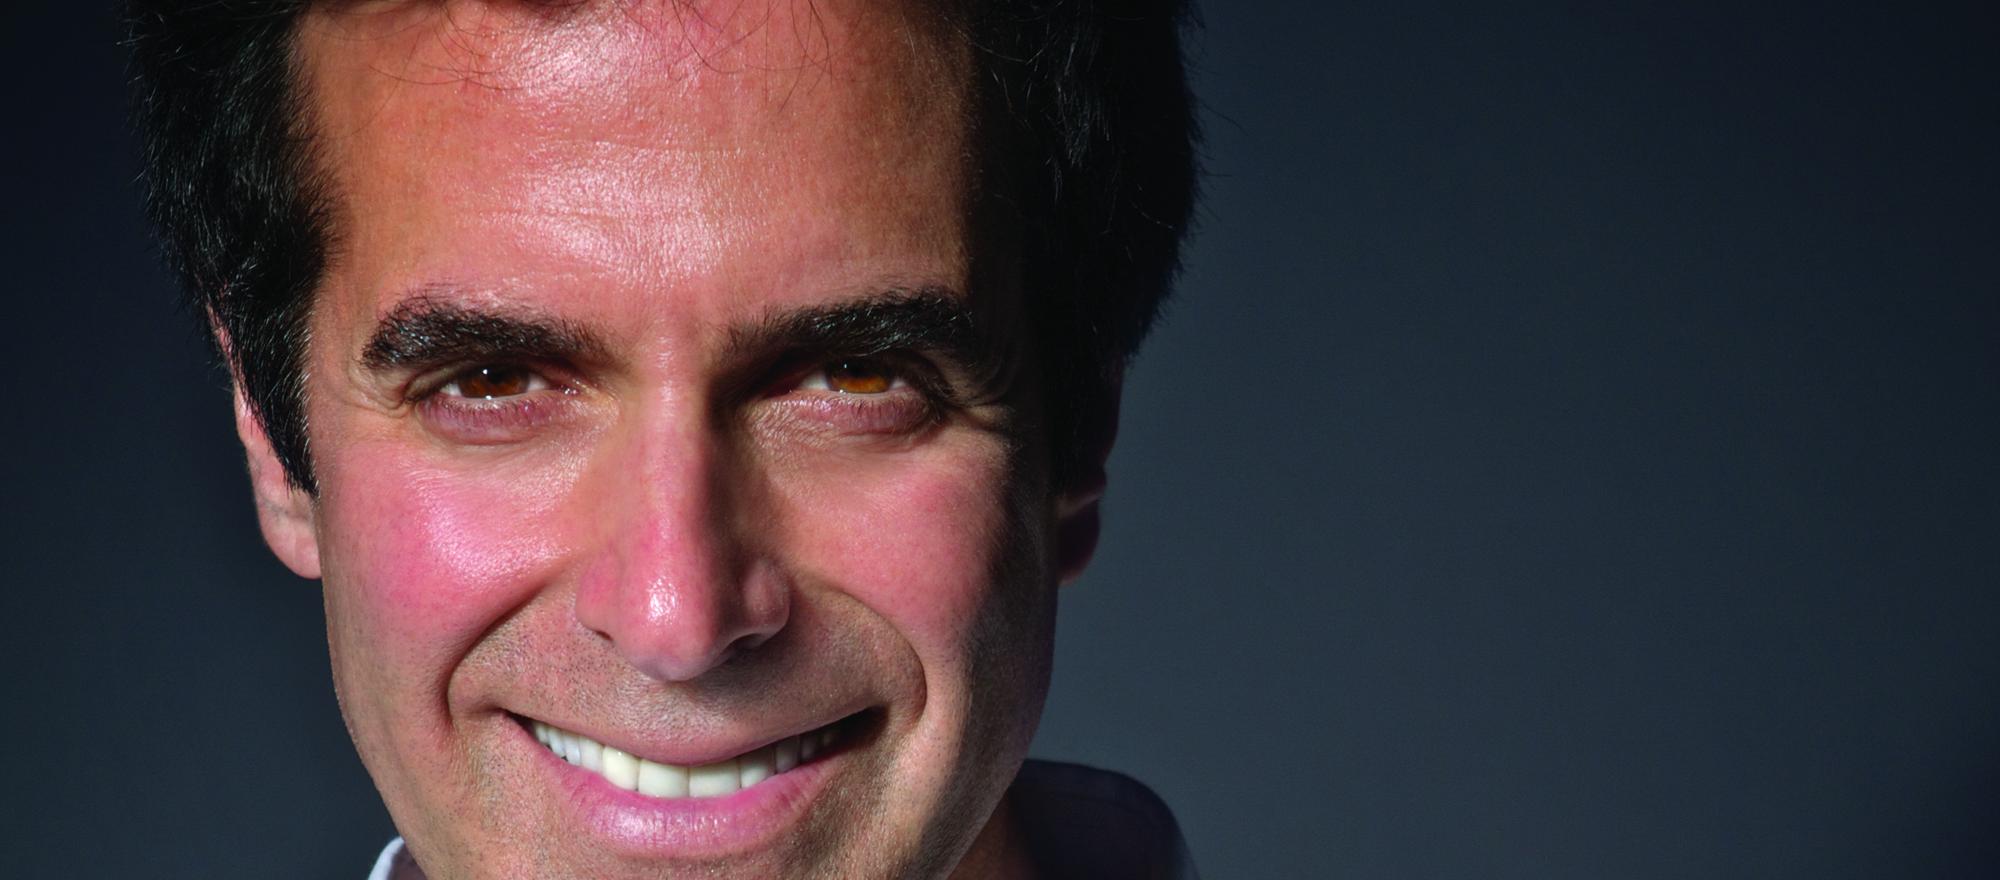 "We have so much unhappiness in the world," says David Copperfield, "and people need to dream and be transported. Music does that, movies do that, and magic does that." (Photo: Courtesy of David Copperfield)